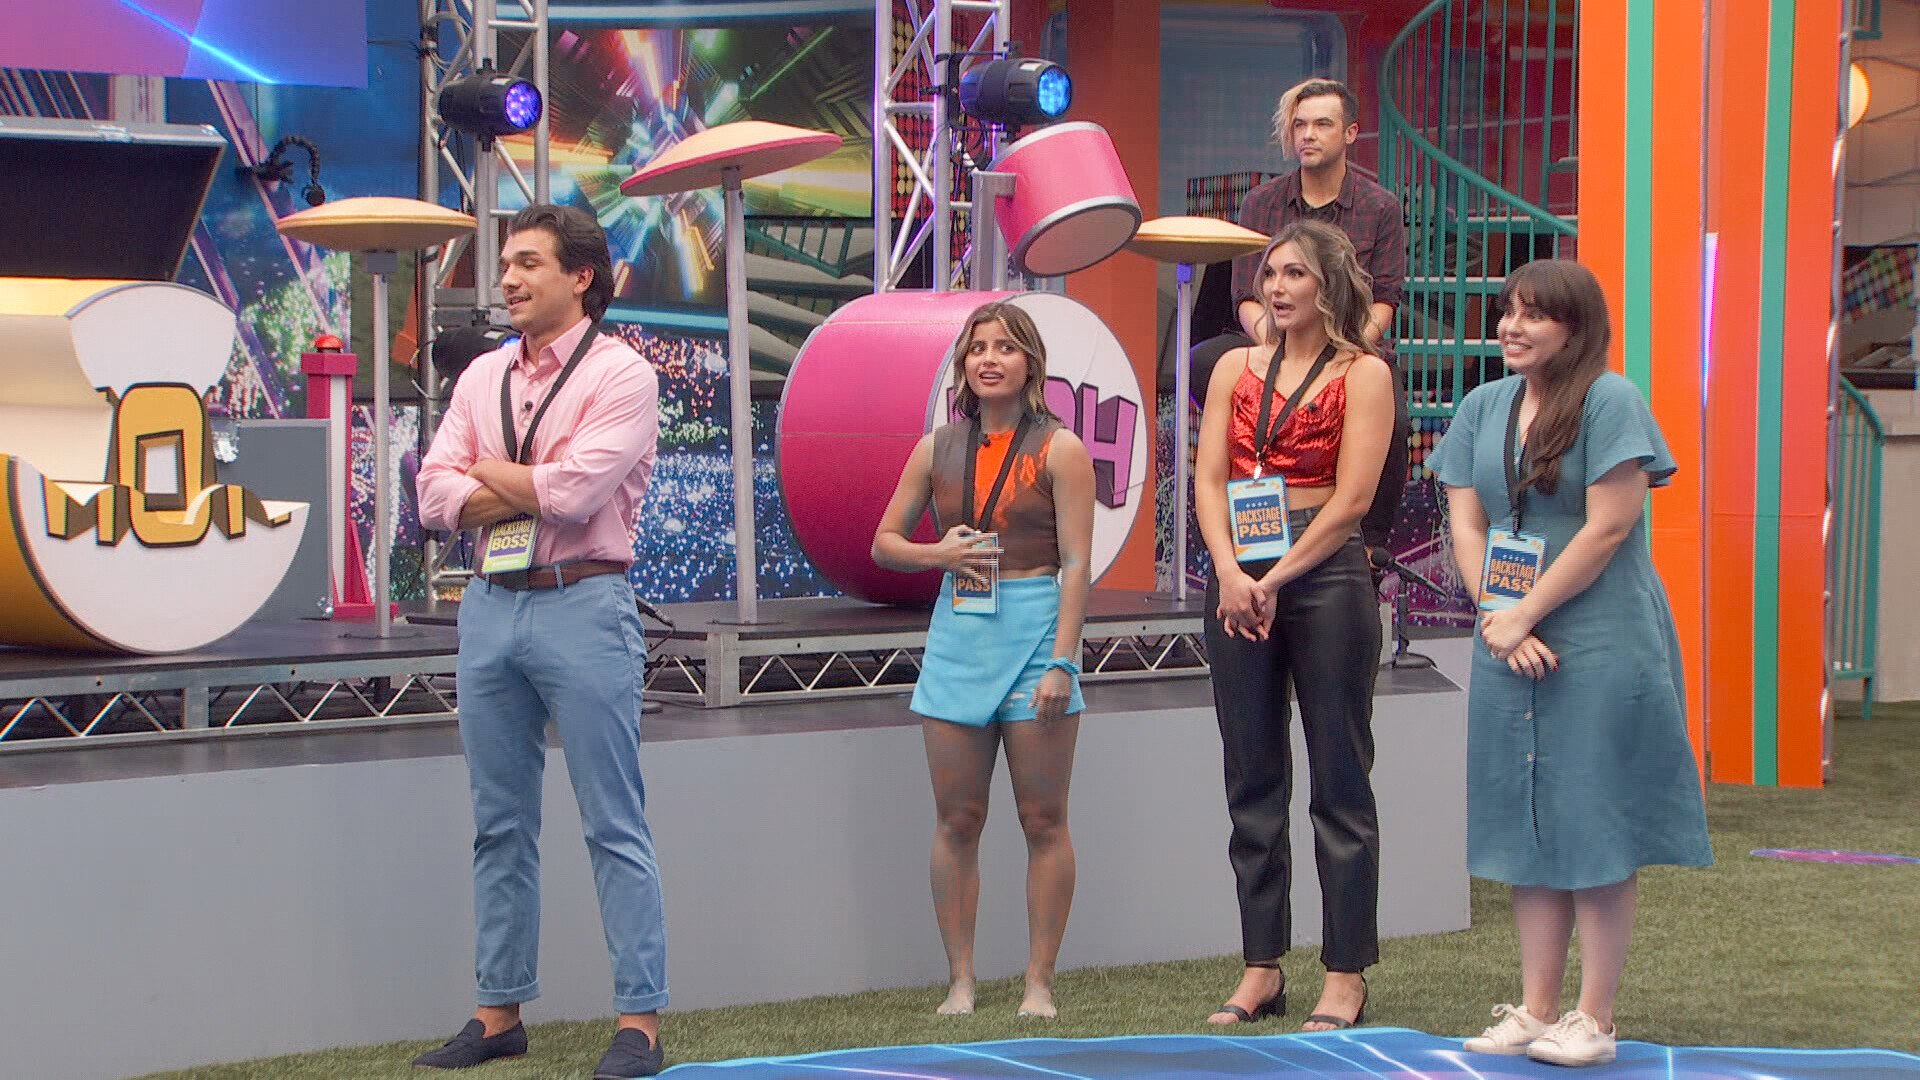 Joe ‘Pooch’ Picciarelli, Polamar Agular, Alyssa Snider and Brittany Hoopes standing next to each other during opening challenge of 'Big Brother 24'